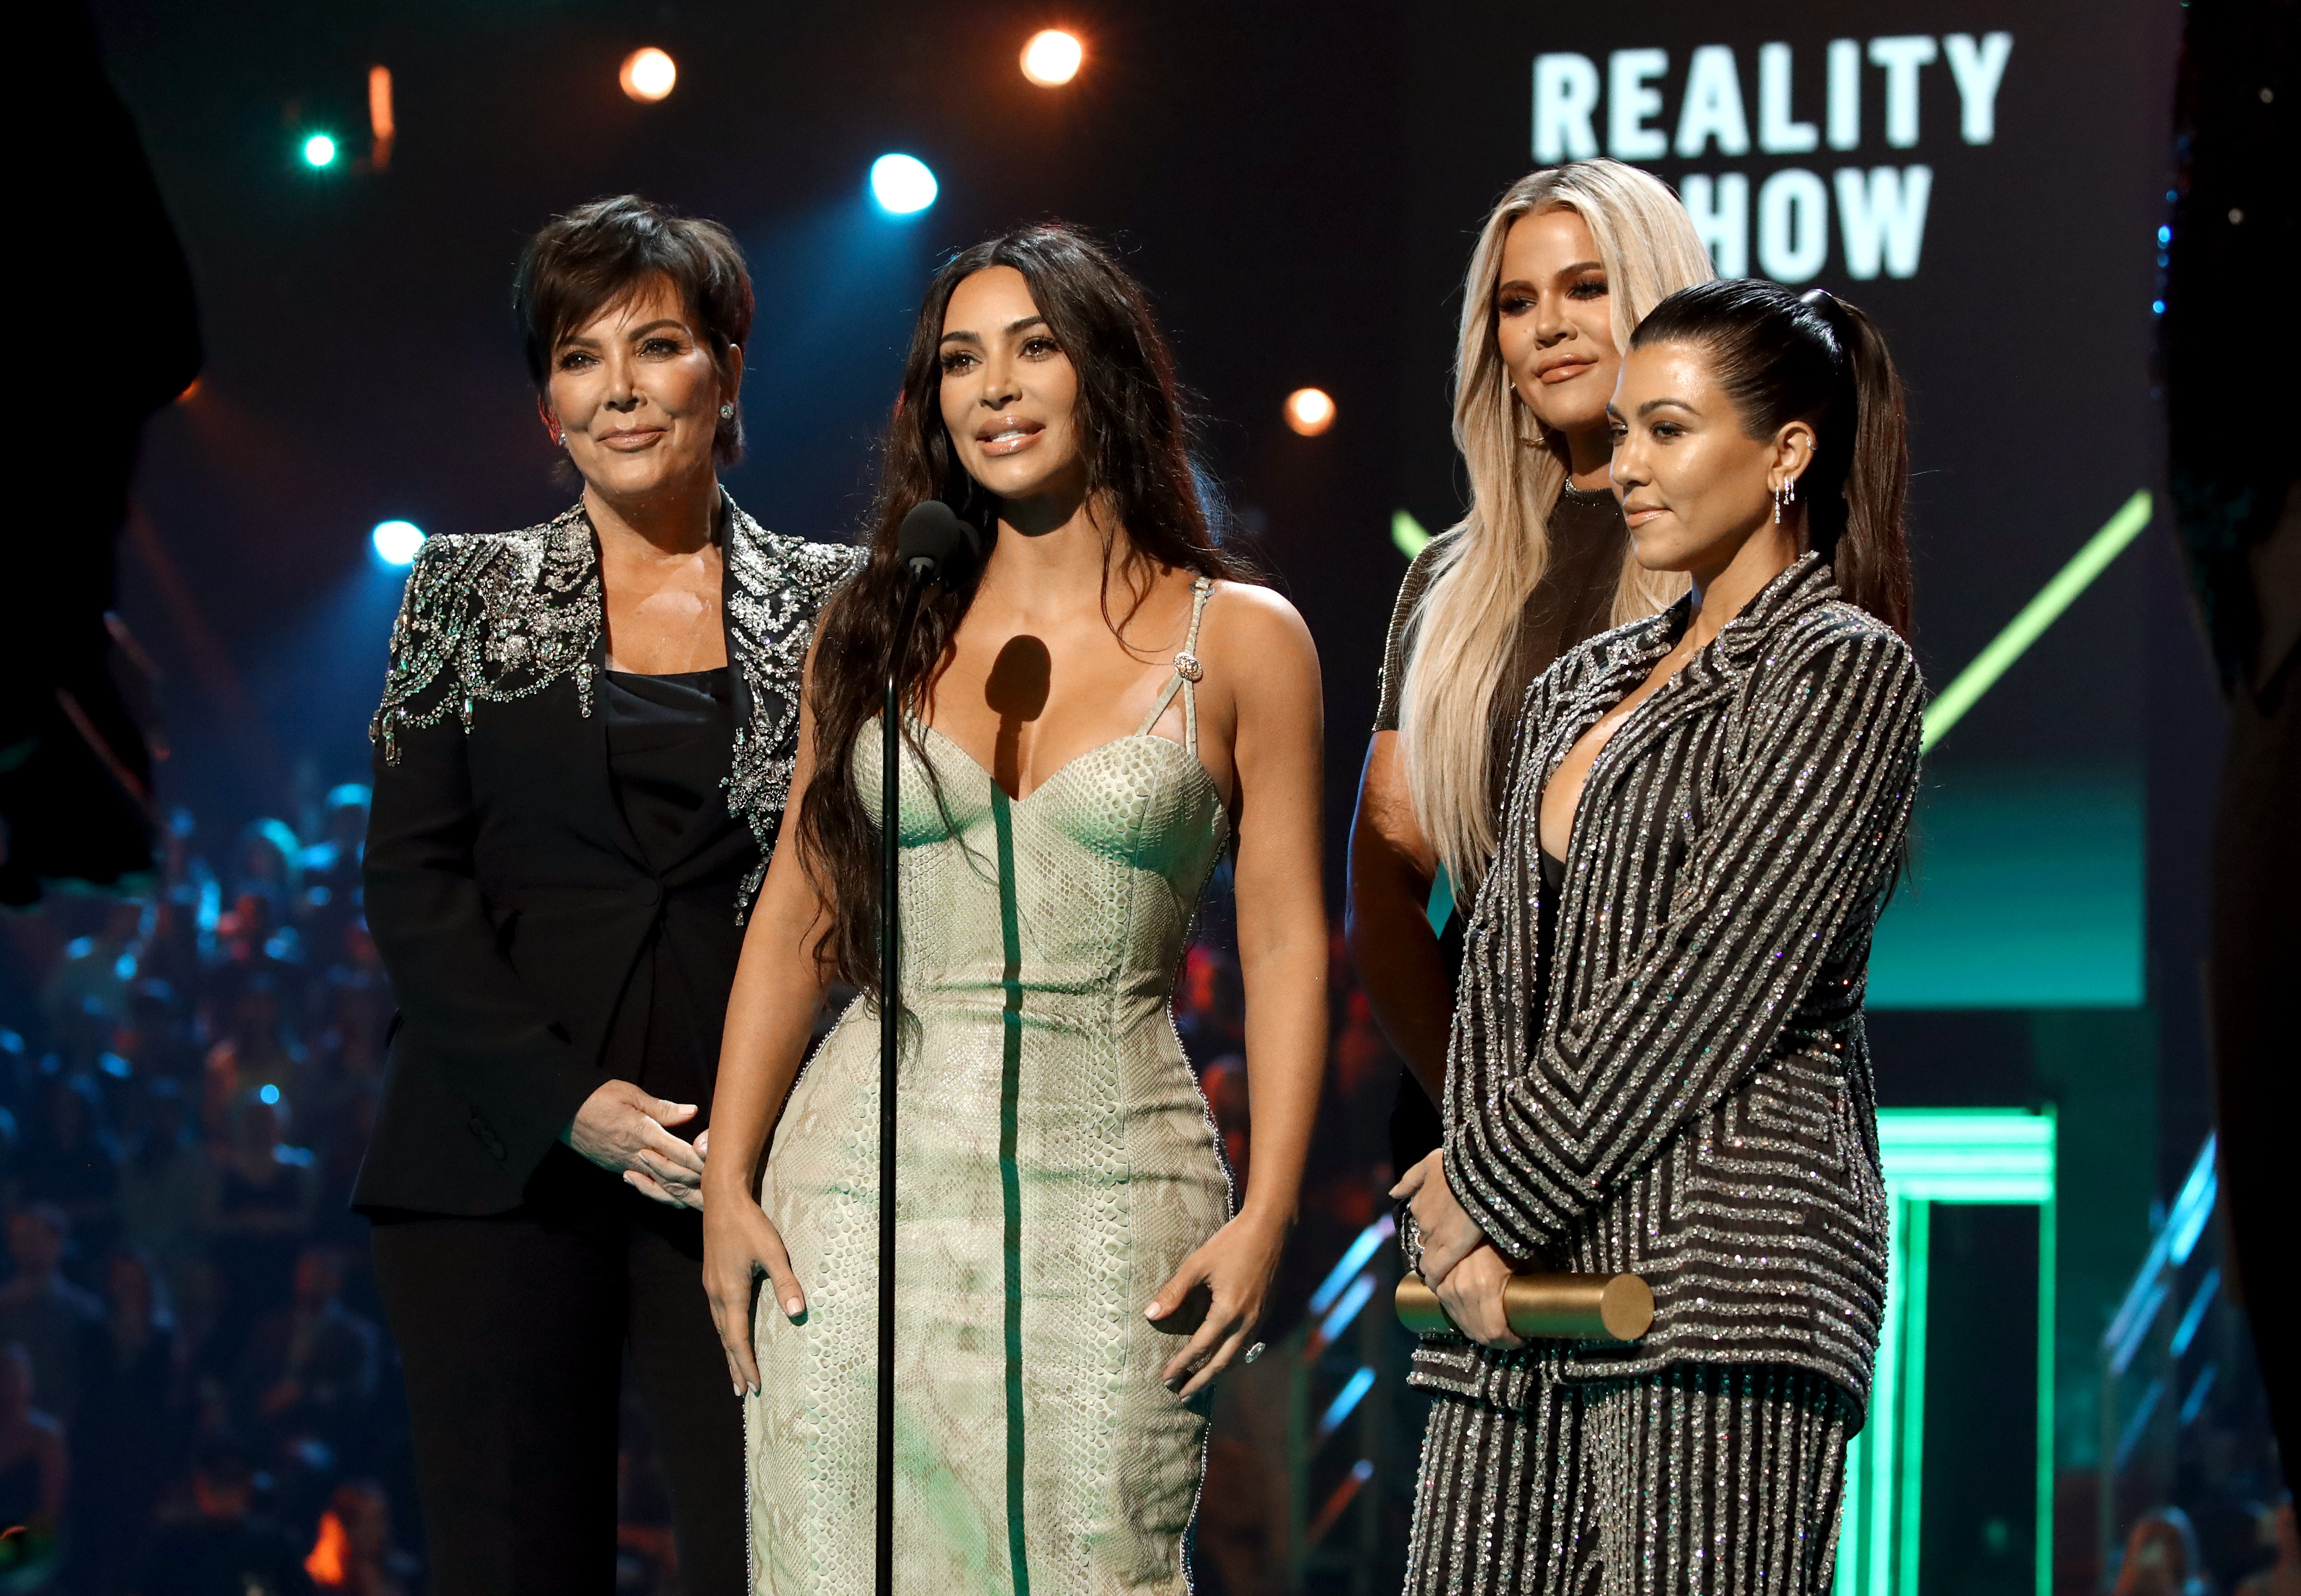 'The Kardashians' stars Kris Jenner and daughters Kim, Khloe, and Kourtney Kardashian onstage and standing in front of a microphone.